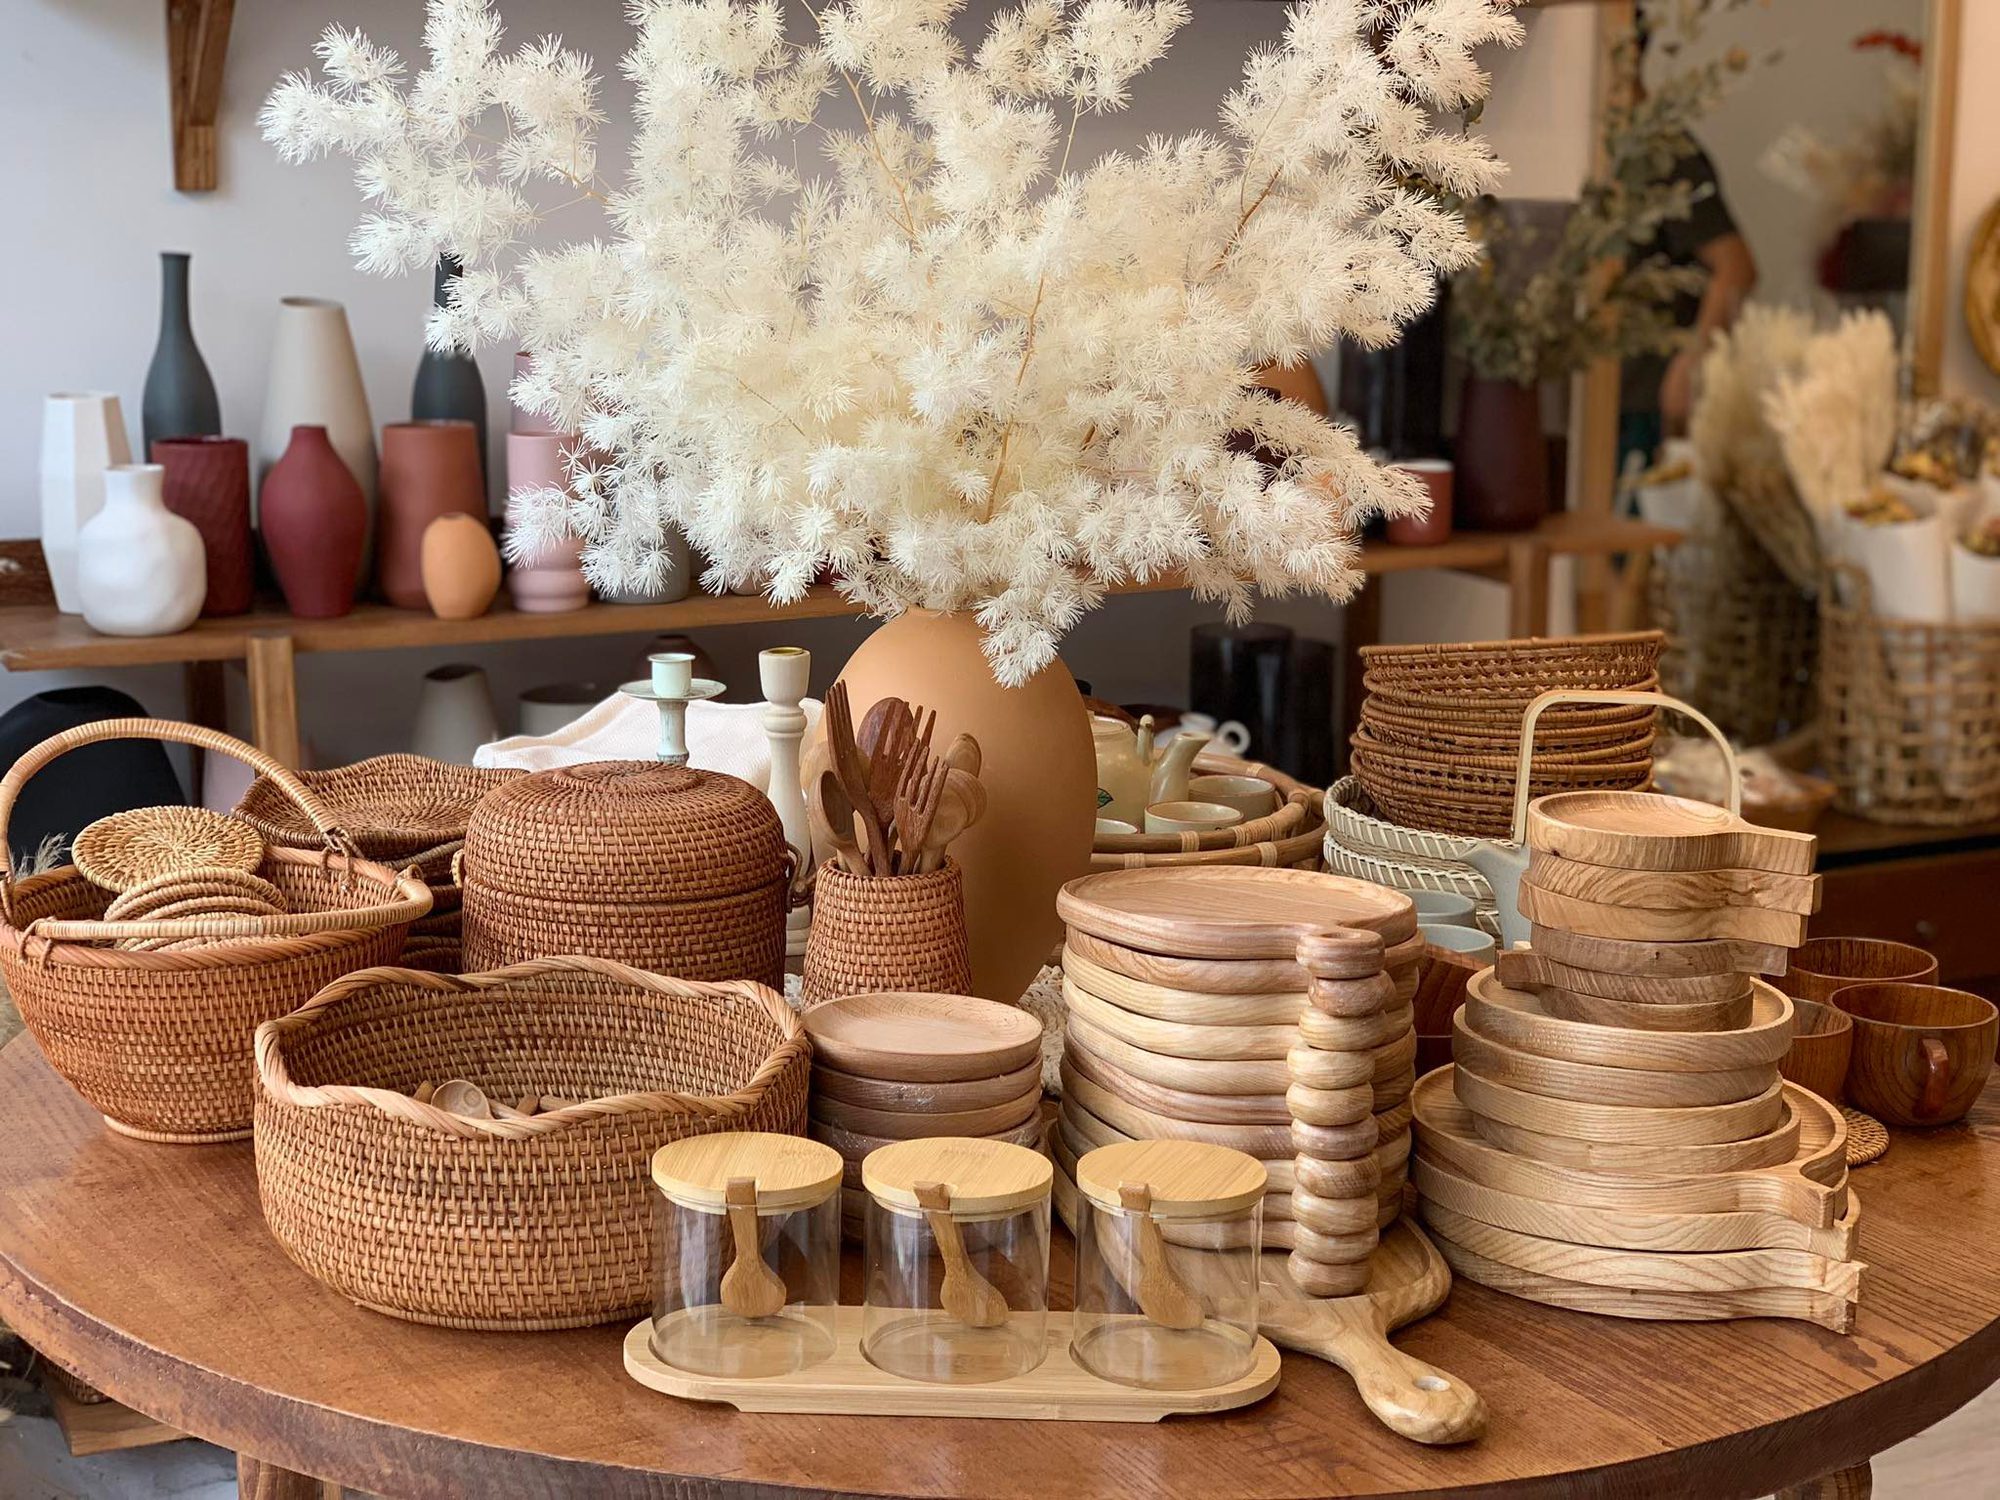 Take a tour of Hanoi to discover 4 shops selling decor: From traditional bamboo and rattan patterns to luxury ceramics, there are enough - Photo 1.